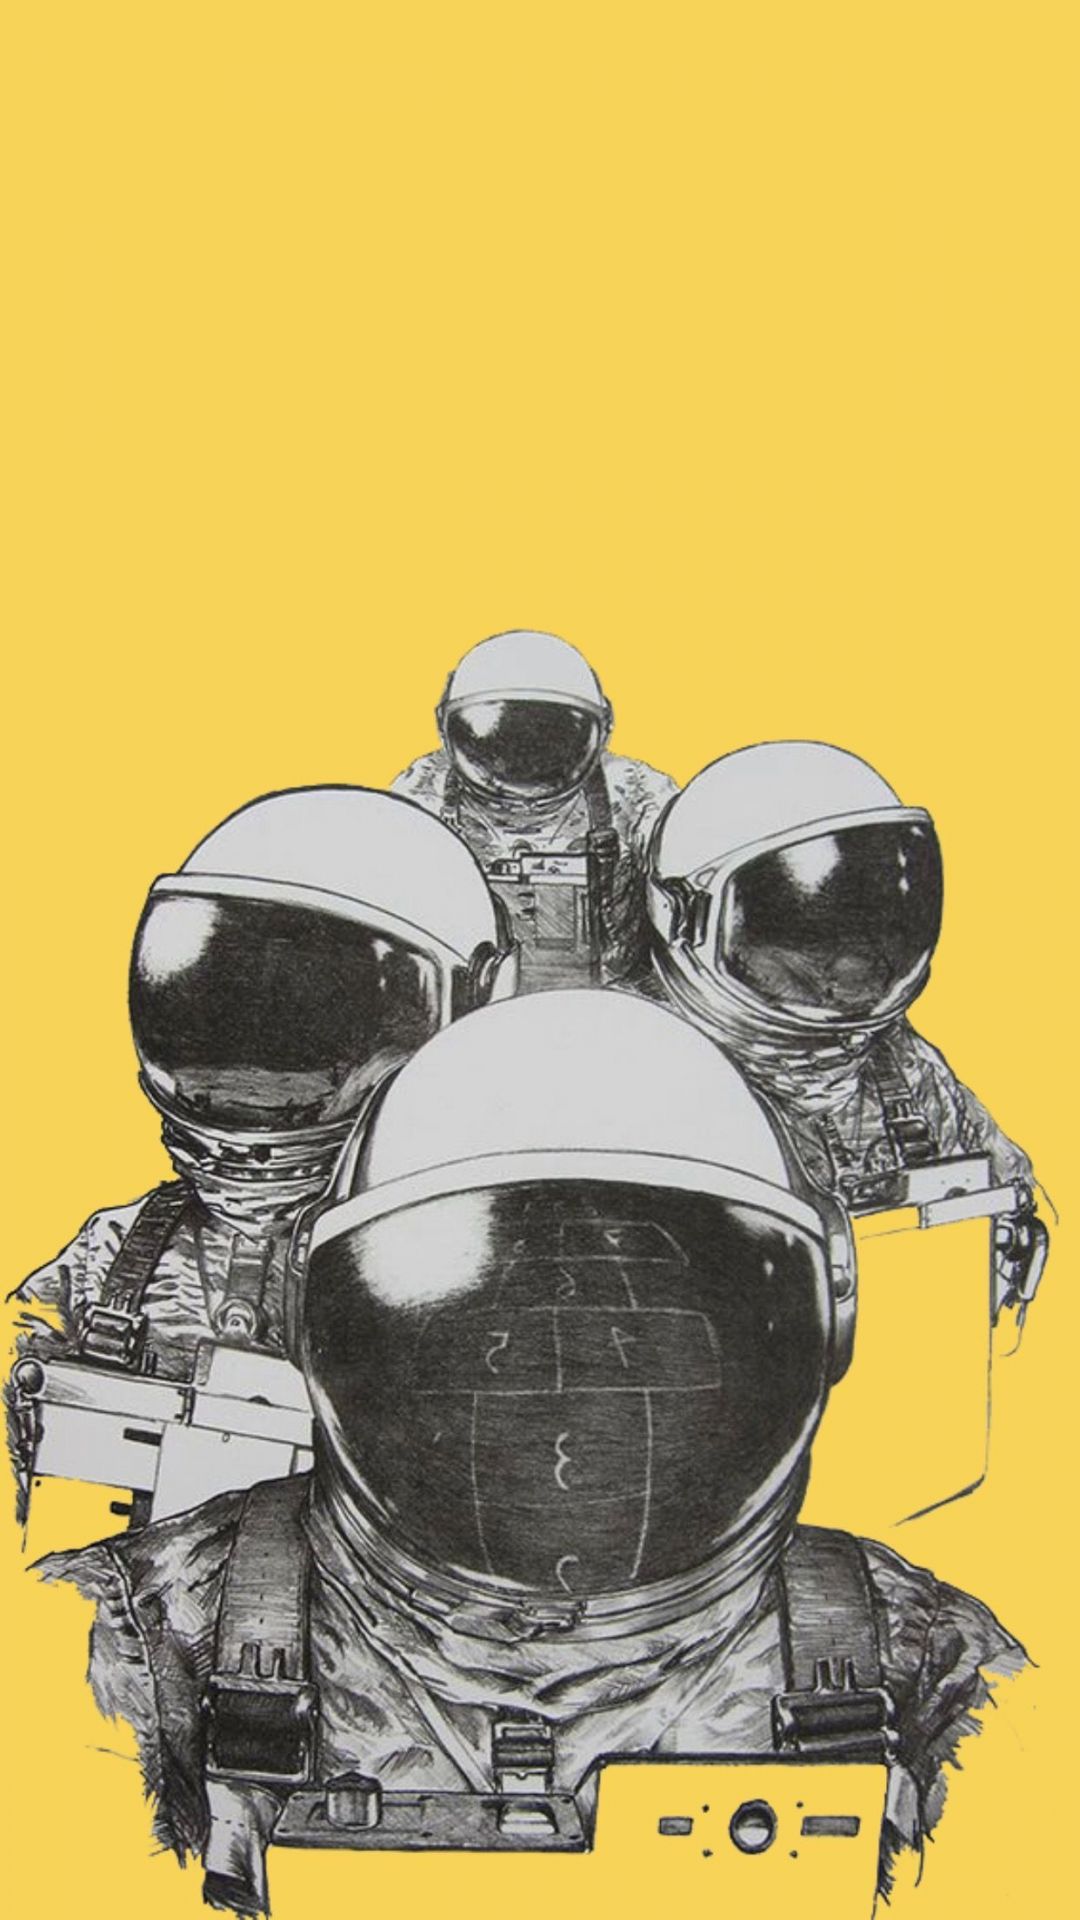 Android, Iphone, Desktop Hd Backgrounds / Wallpapers - Astronaut In Space Drawing - HD Wallpaper 